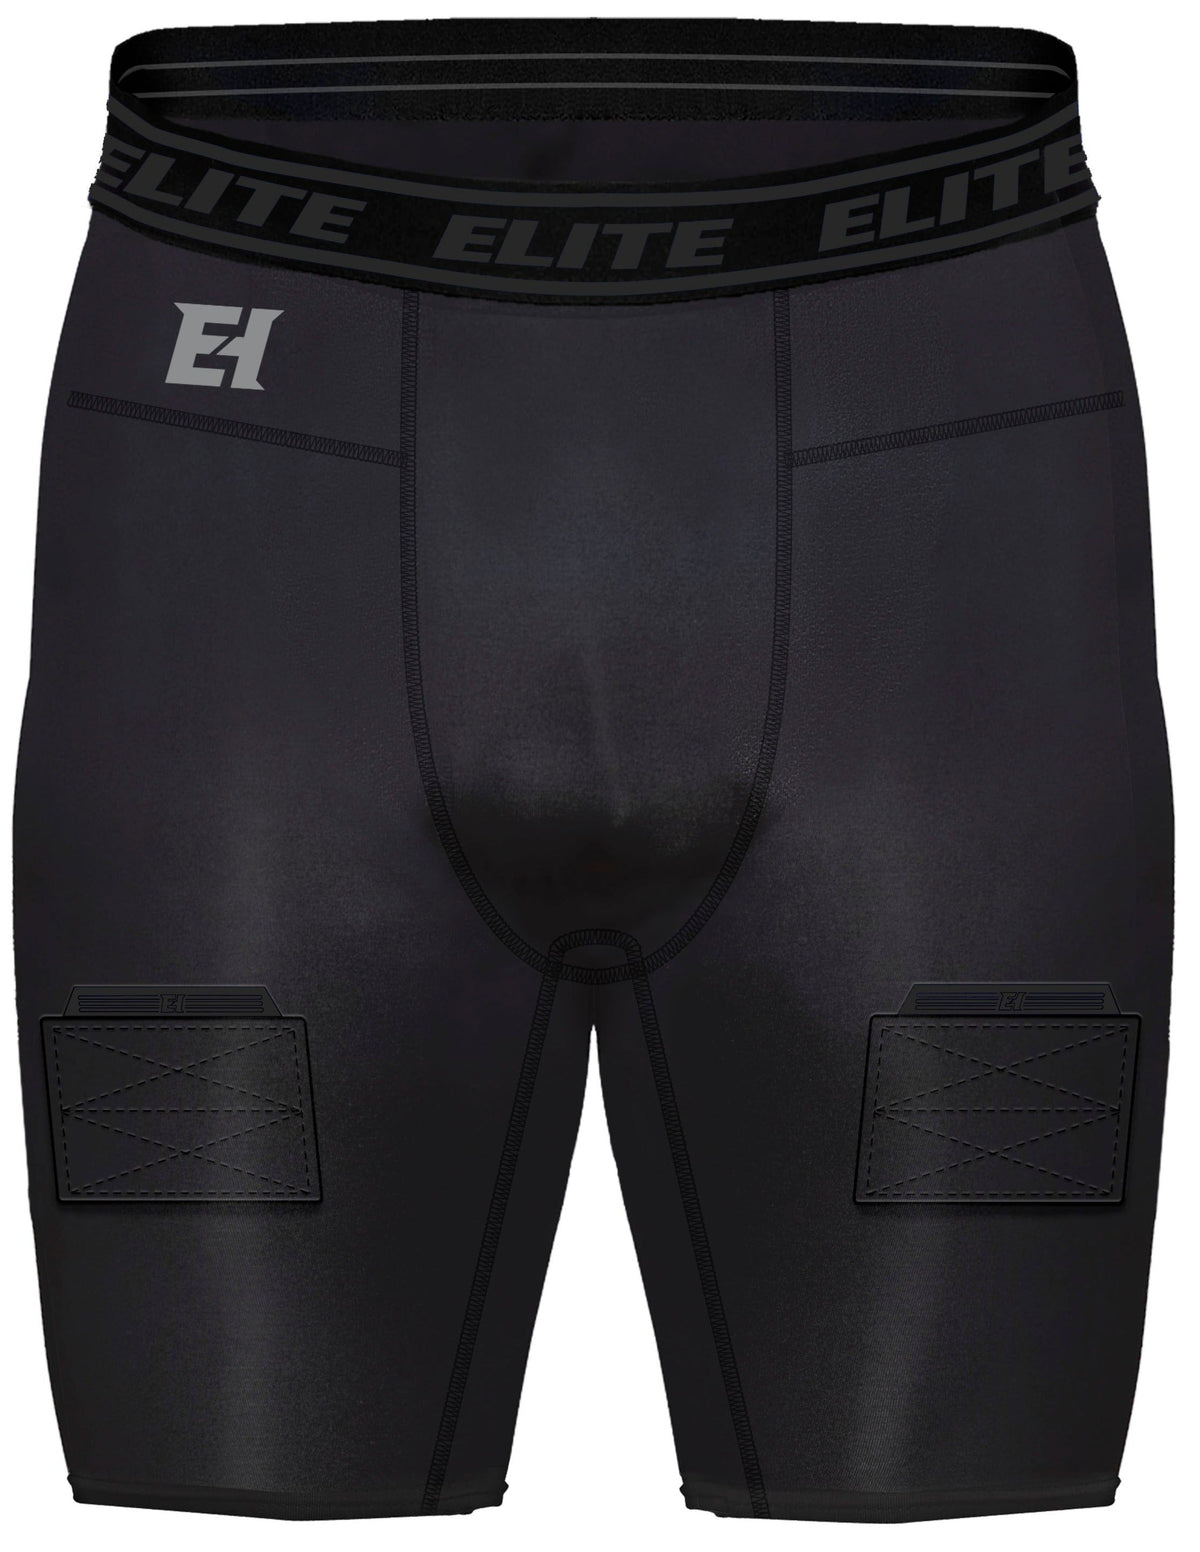 Compression pant with cup Senior Small, Hockey underwear and socks